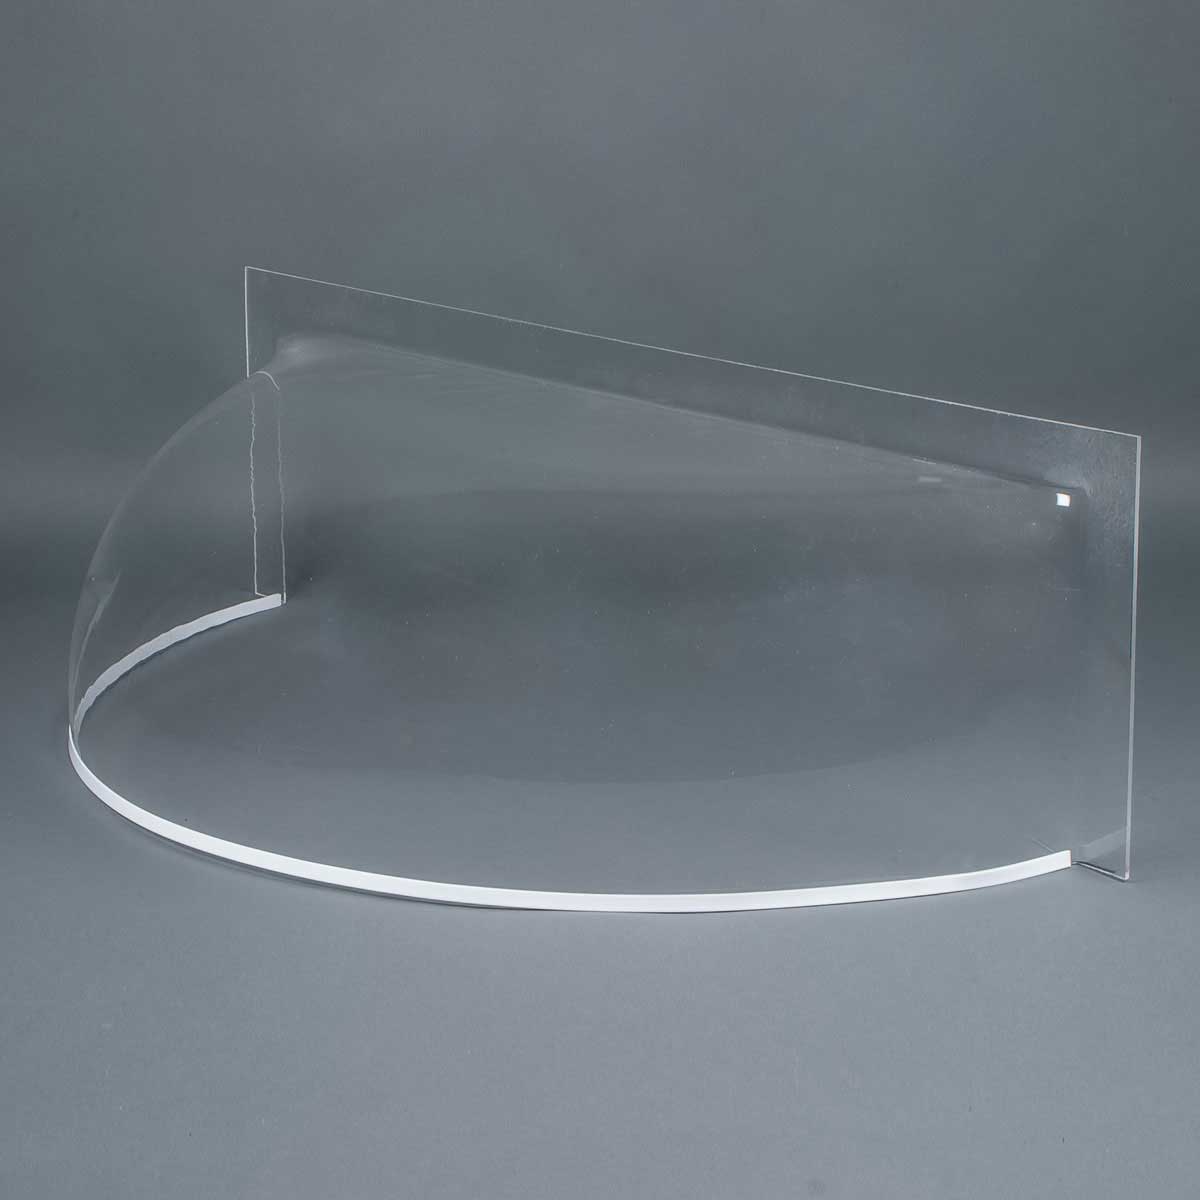 Front view of round front, clear acrylic, Lustercraft Plastics basement window well cover